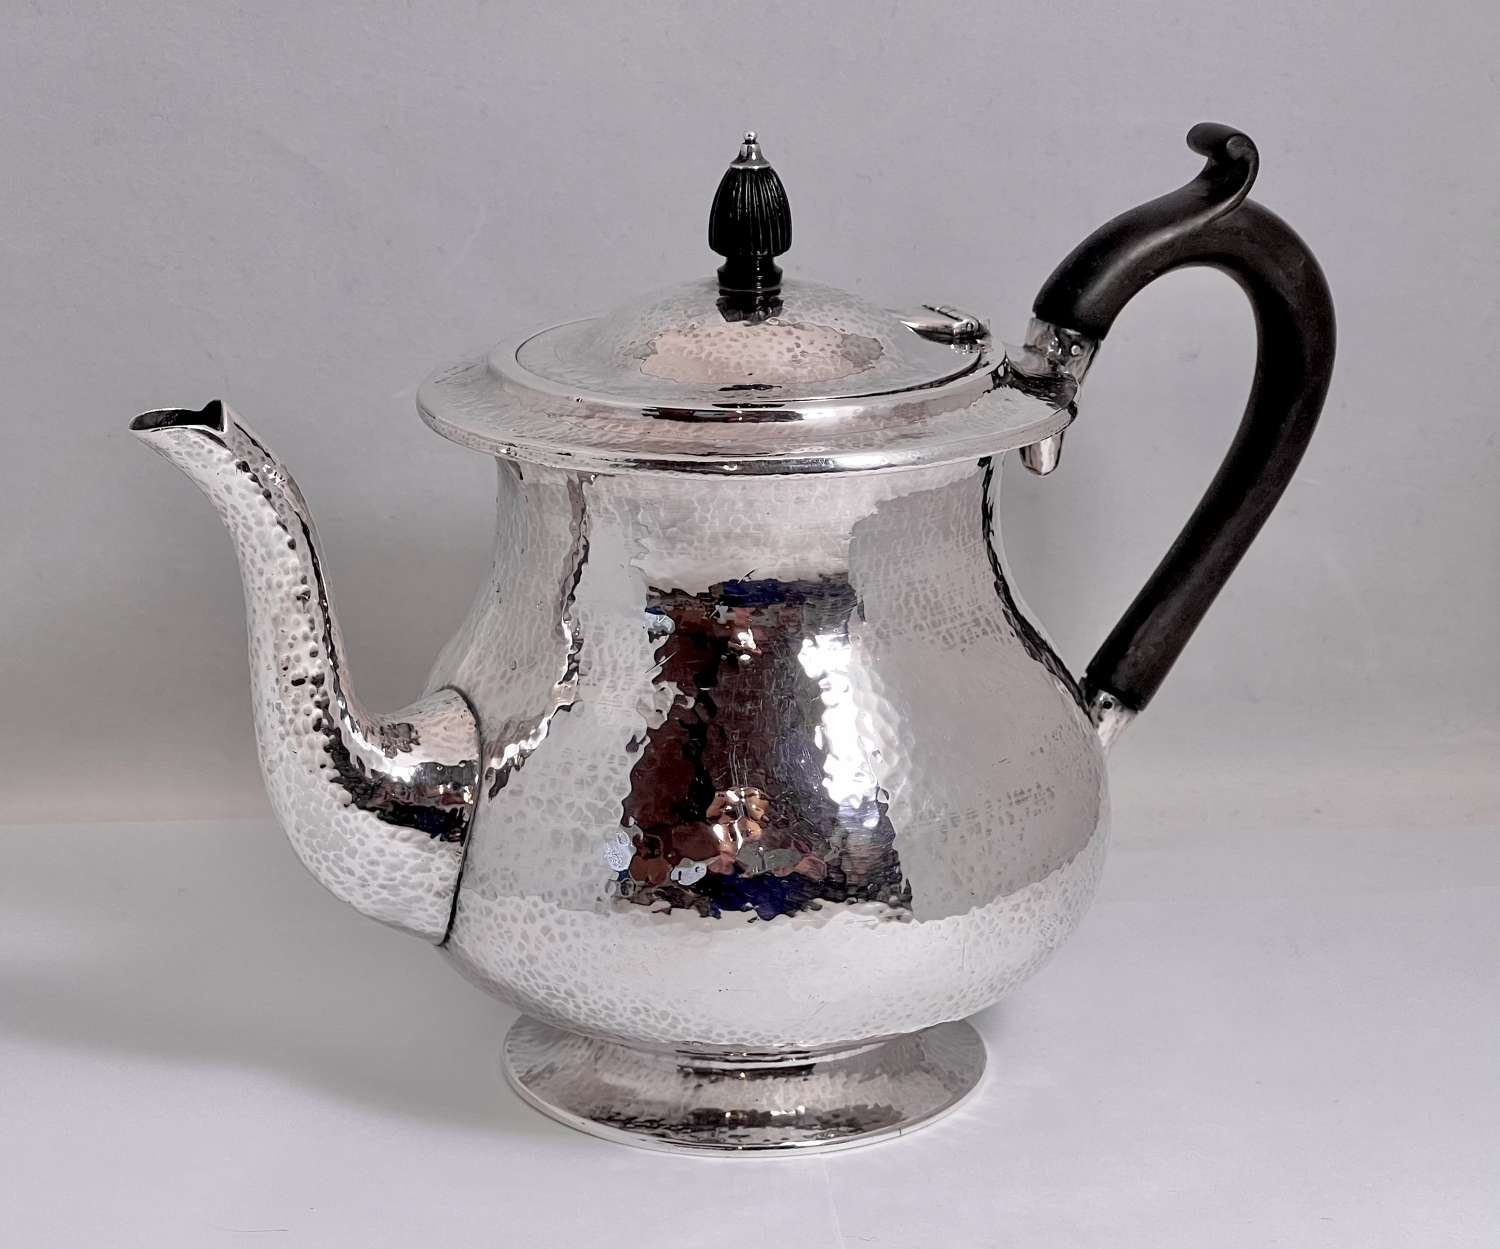 Arts and Crafts silver teapot by Sybil Dunlop, London 1930.